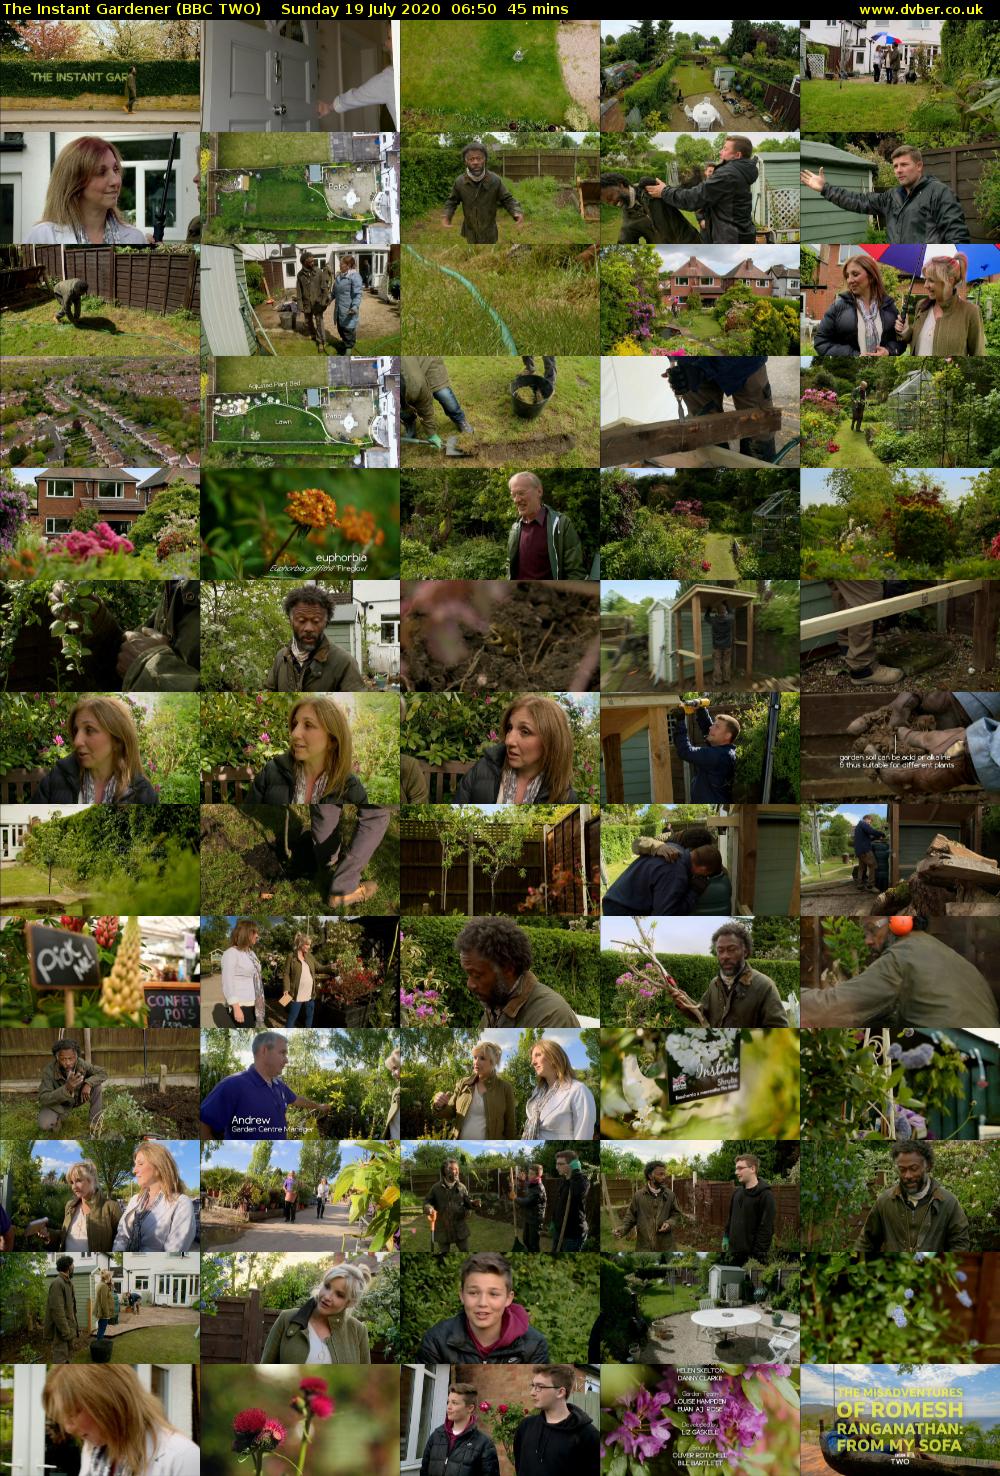 The Instant Gardener (BBC TWO) Sunday 19 July 2020 06:50 - 07:35